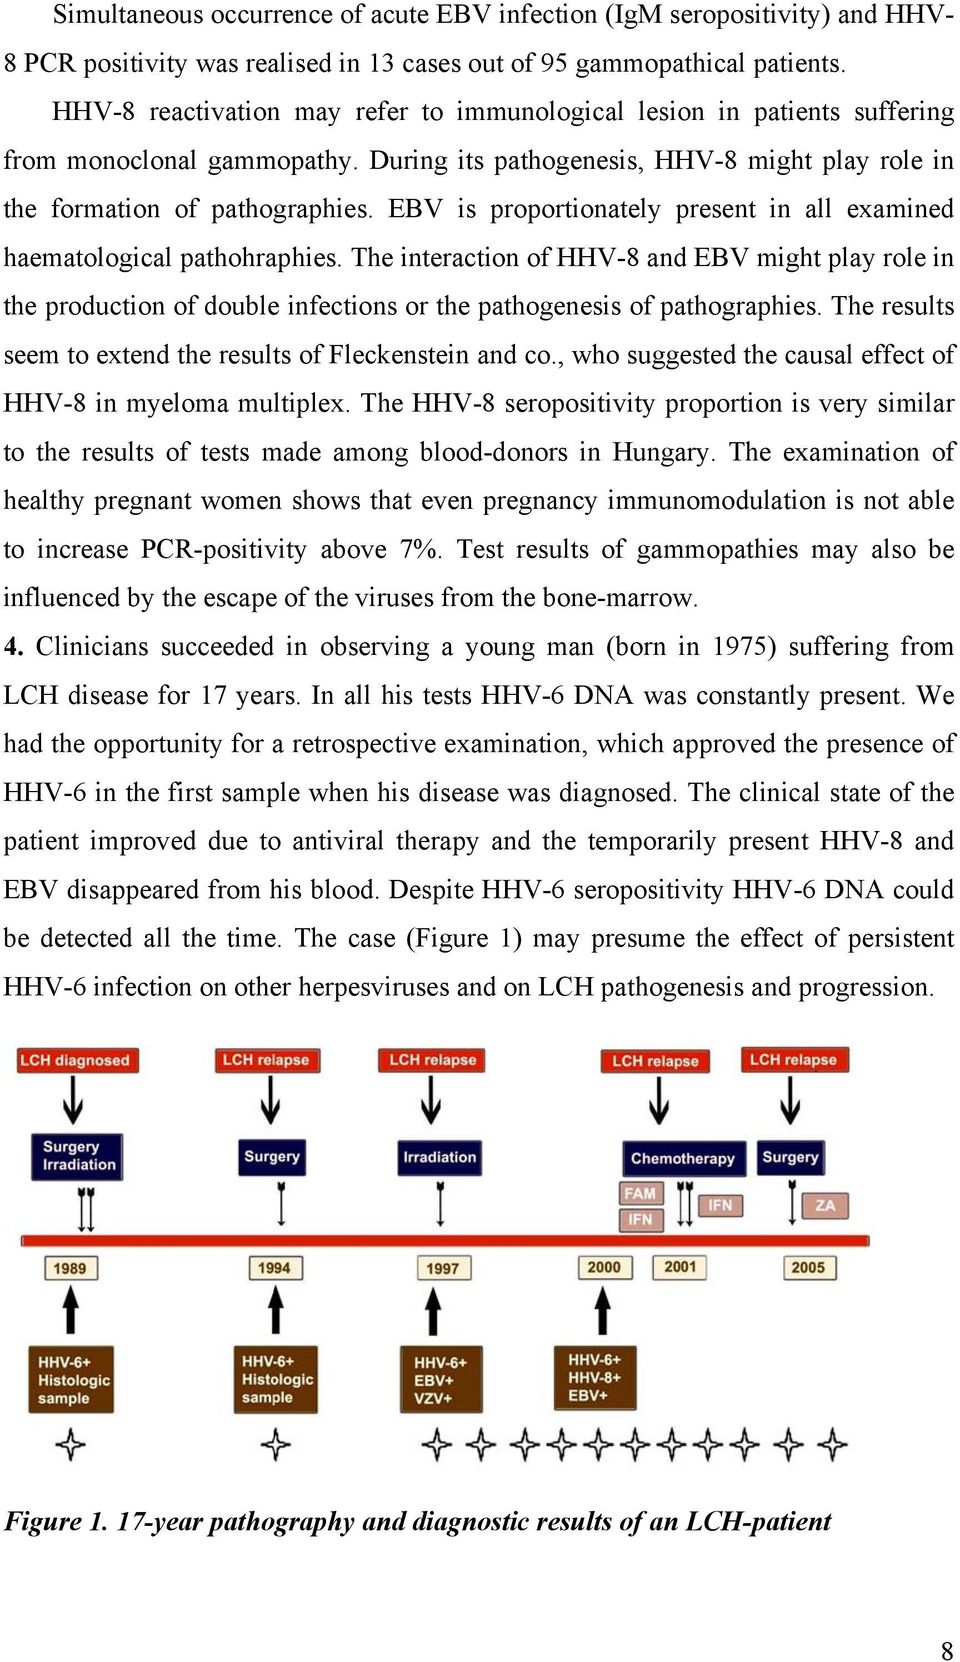 EBV is proportionately present in all examined haematological pathohraphies.